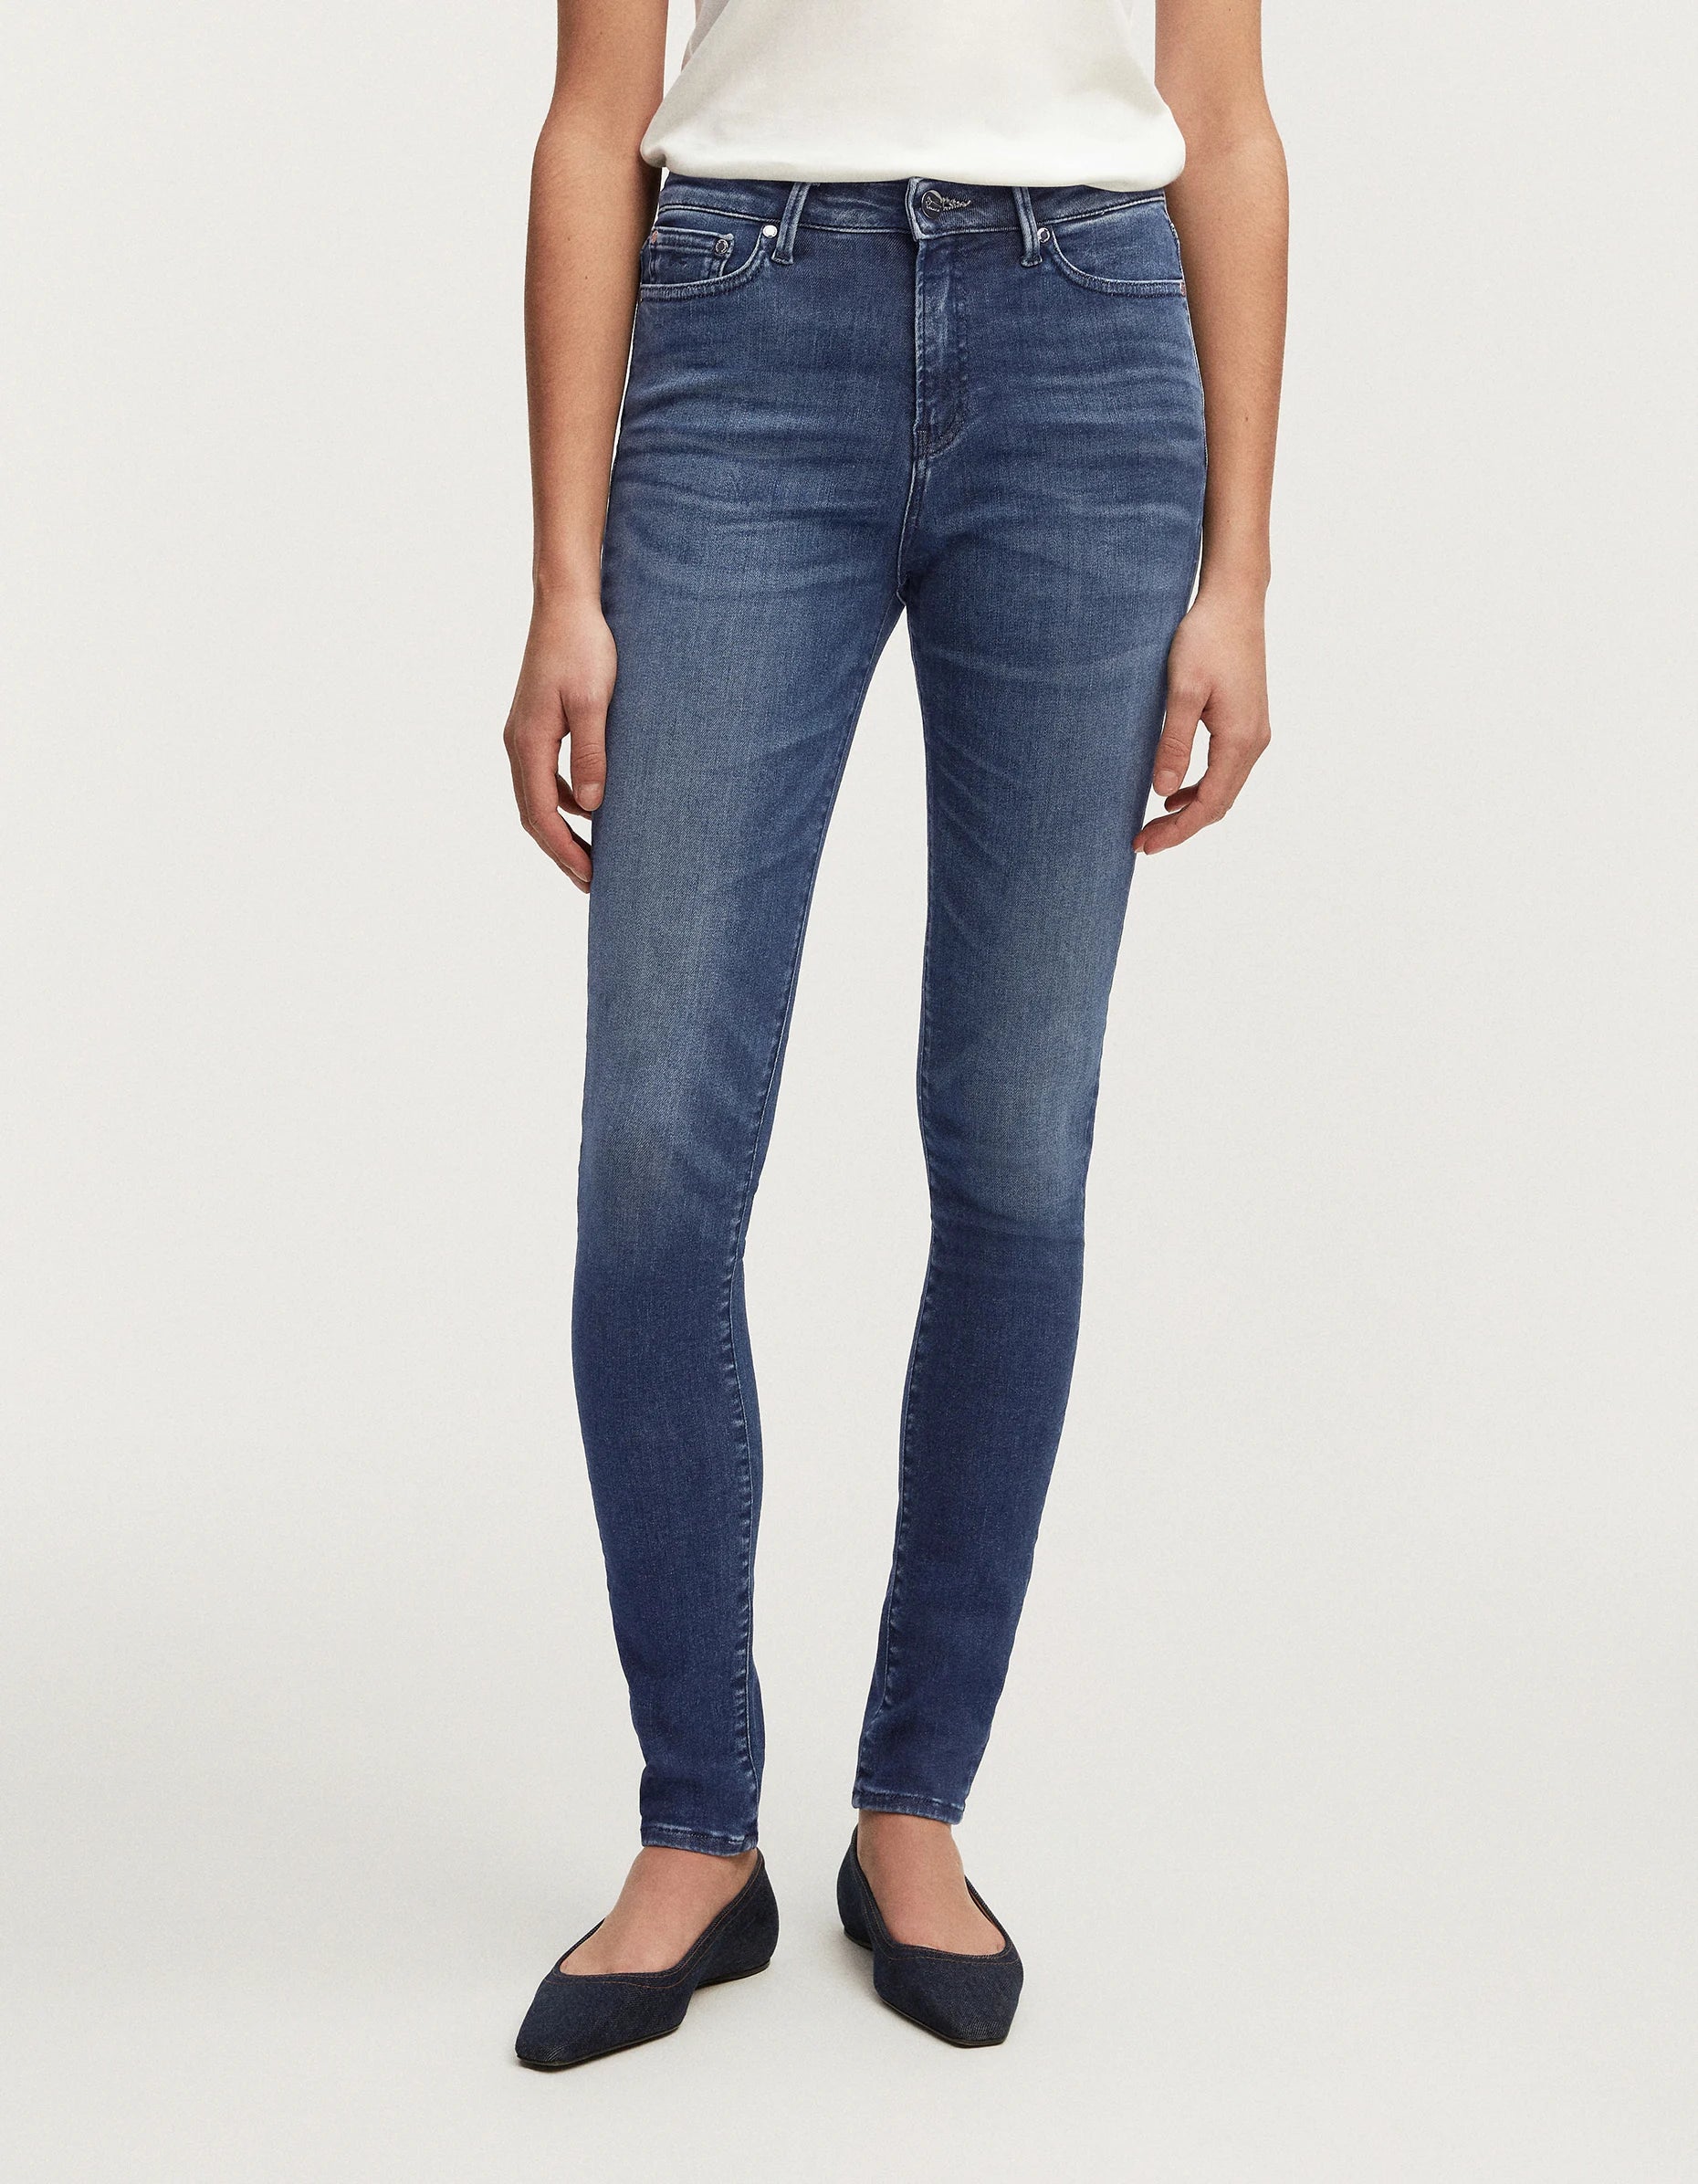 A woman wearing a pair of Denham NEEDLE Skinny - Dark Soft Wash high-rise jeans from the 70s.